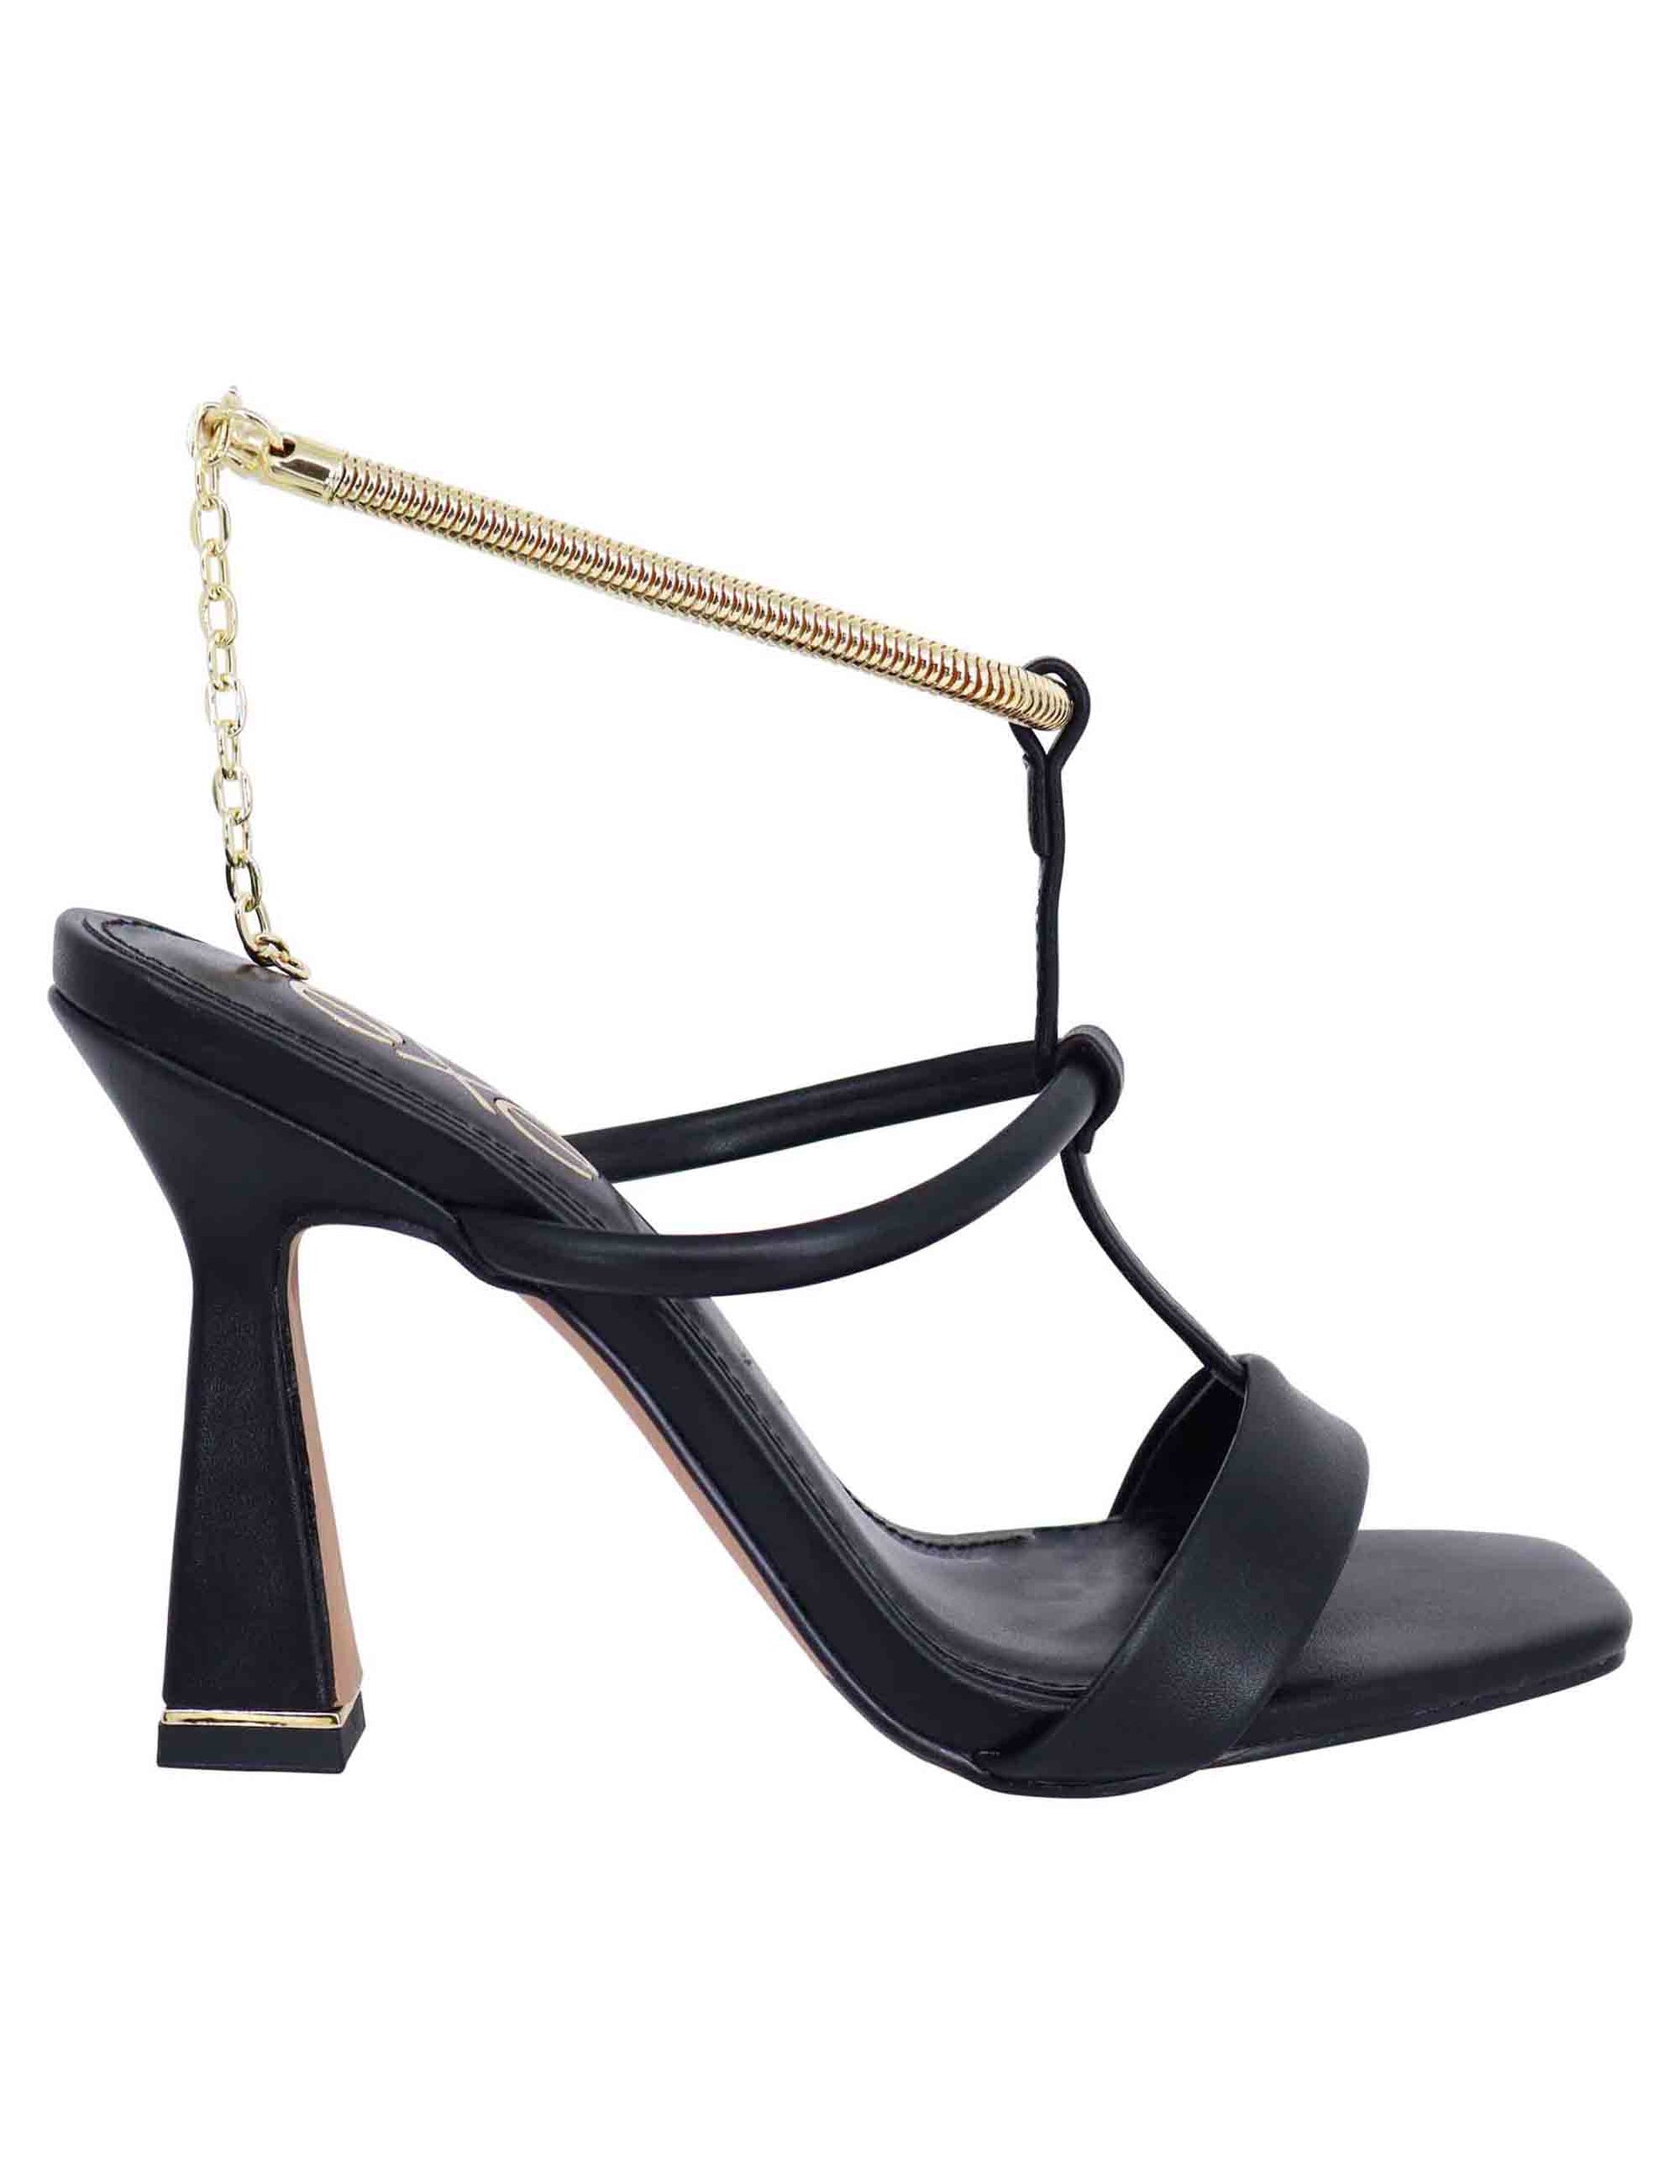 Women's sandals in black eco leather with high heel and soft gold anklet